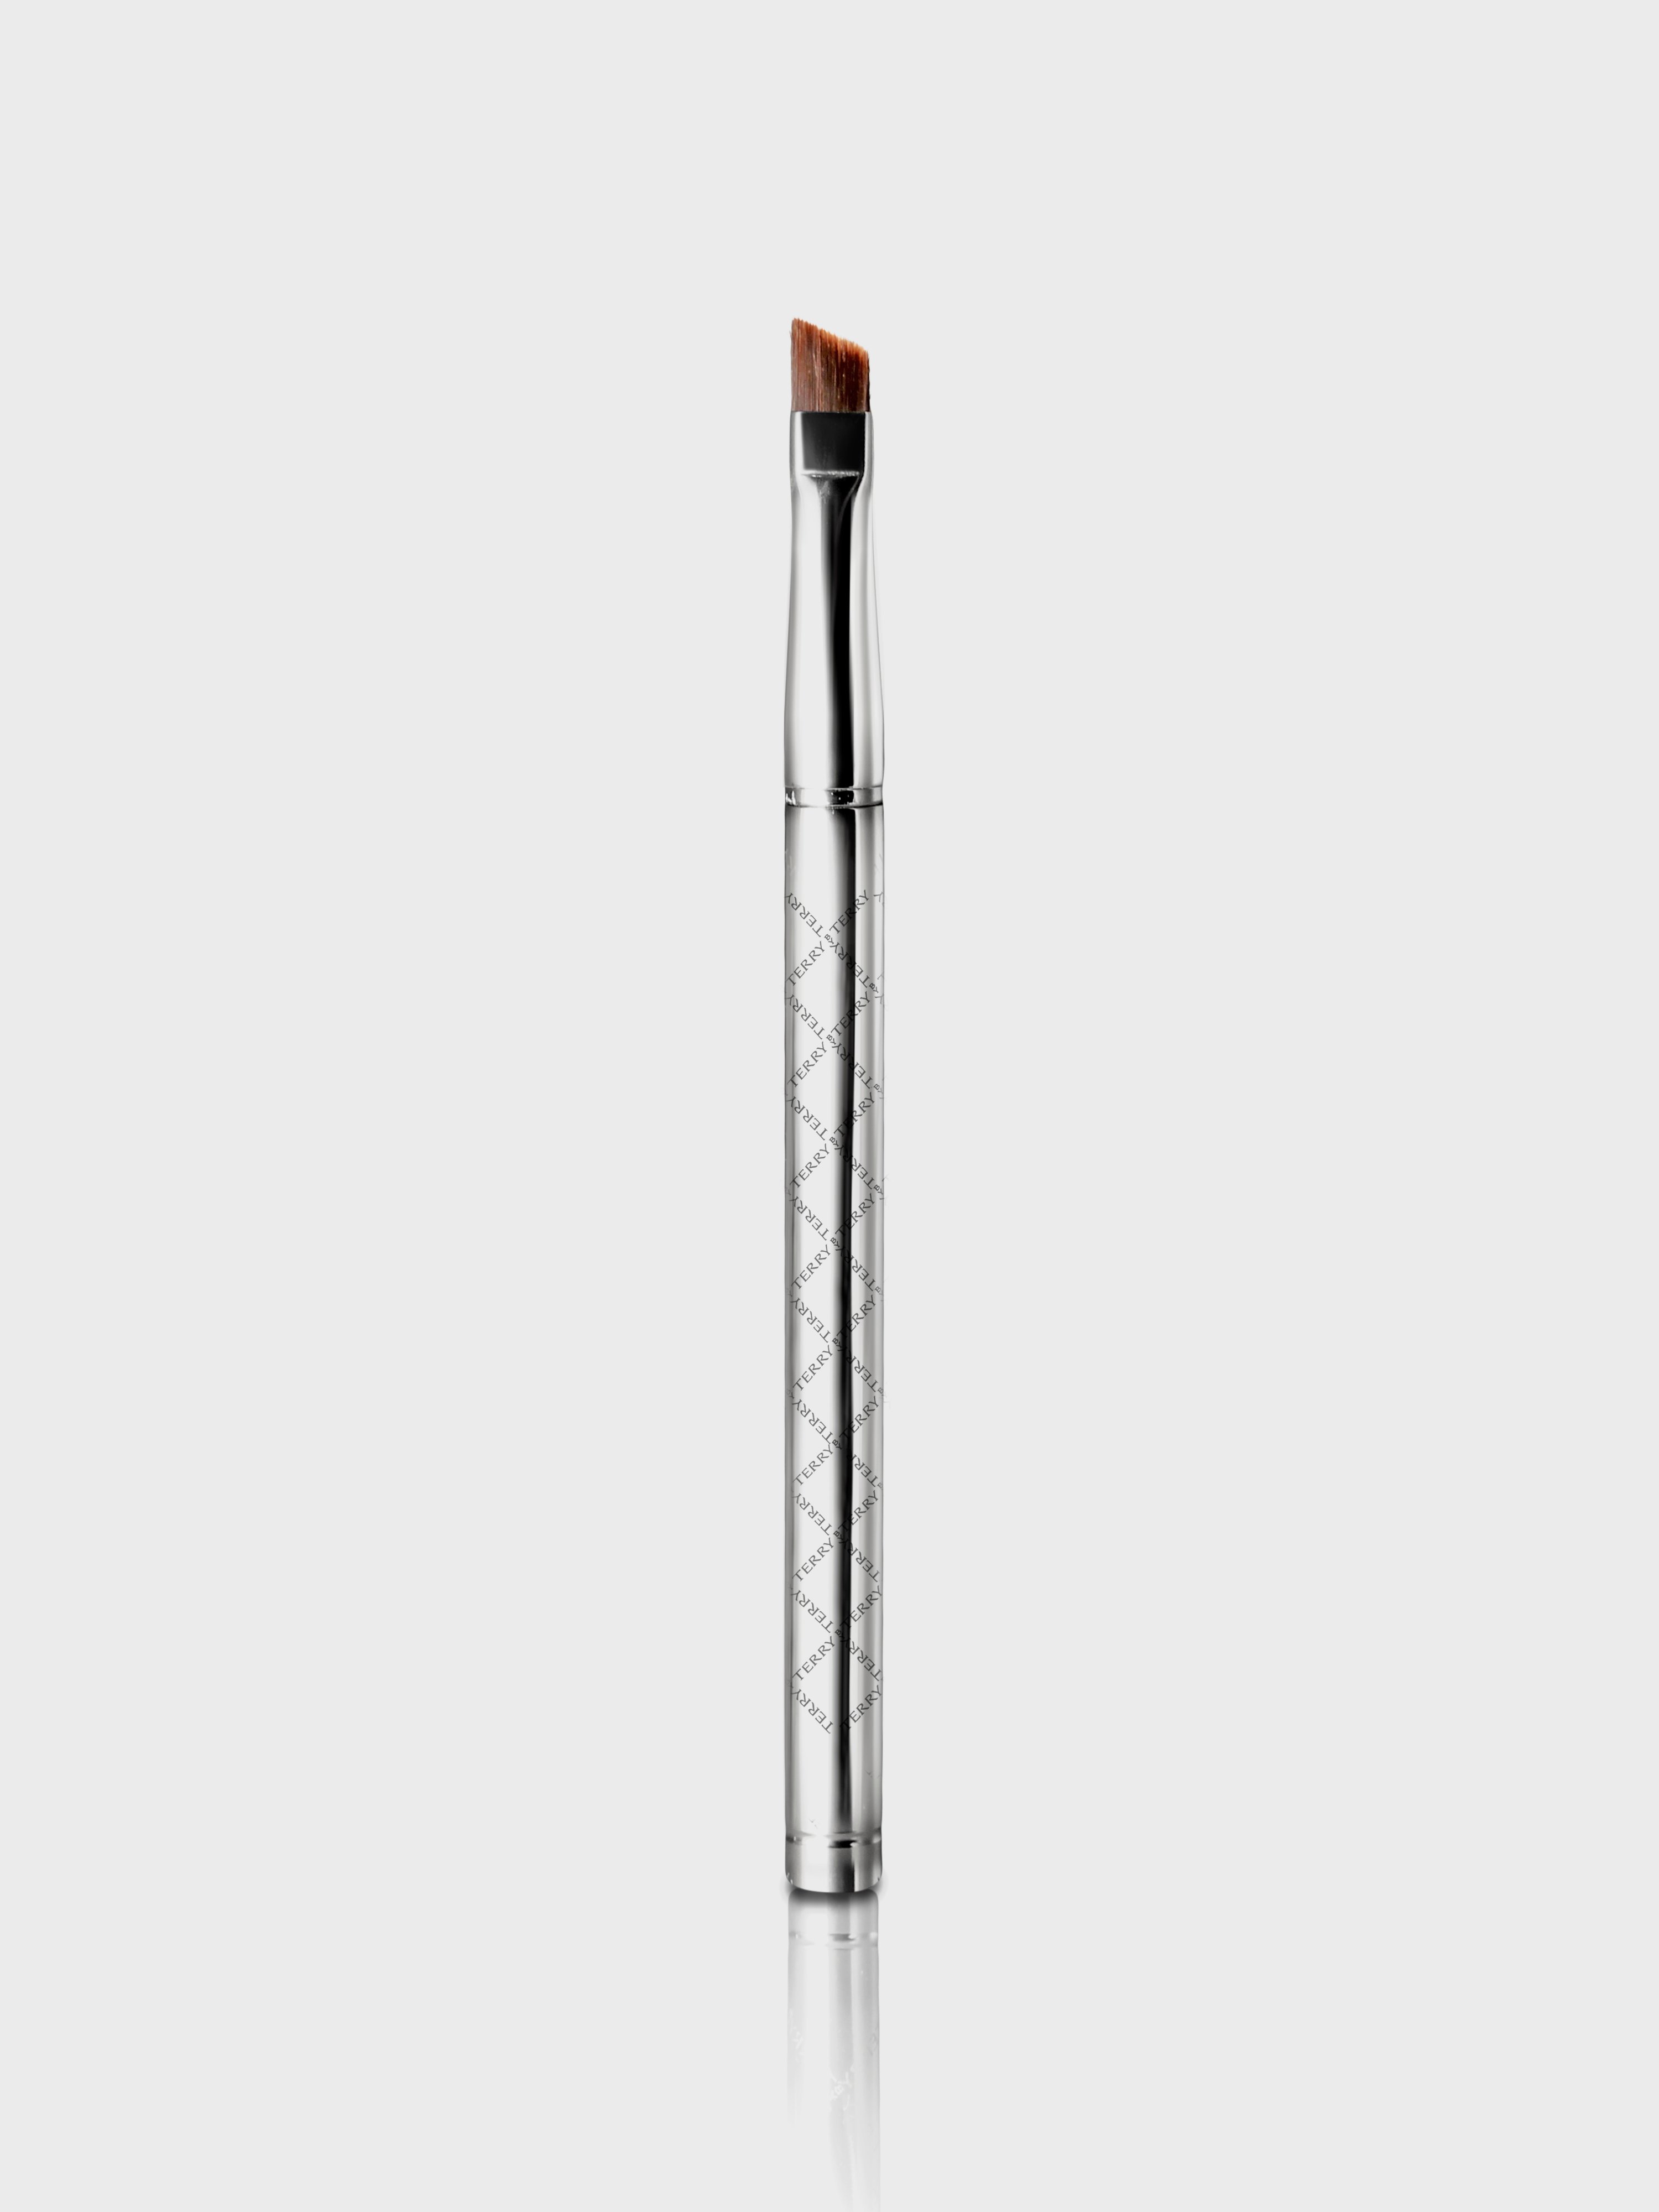 BY TERRY BY TERRY EYELINER BRUSH